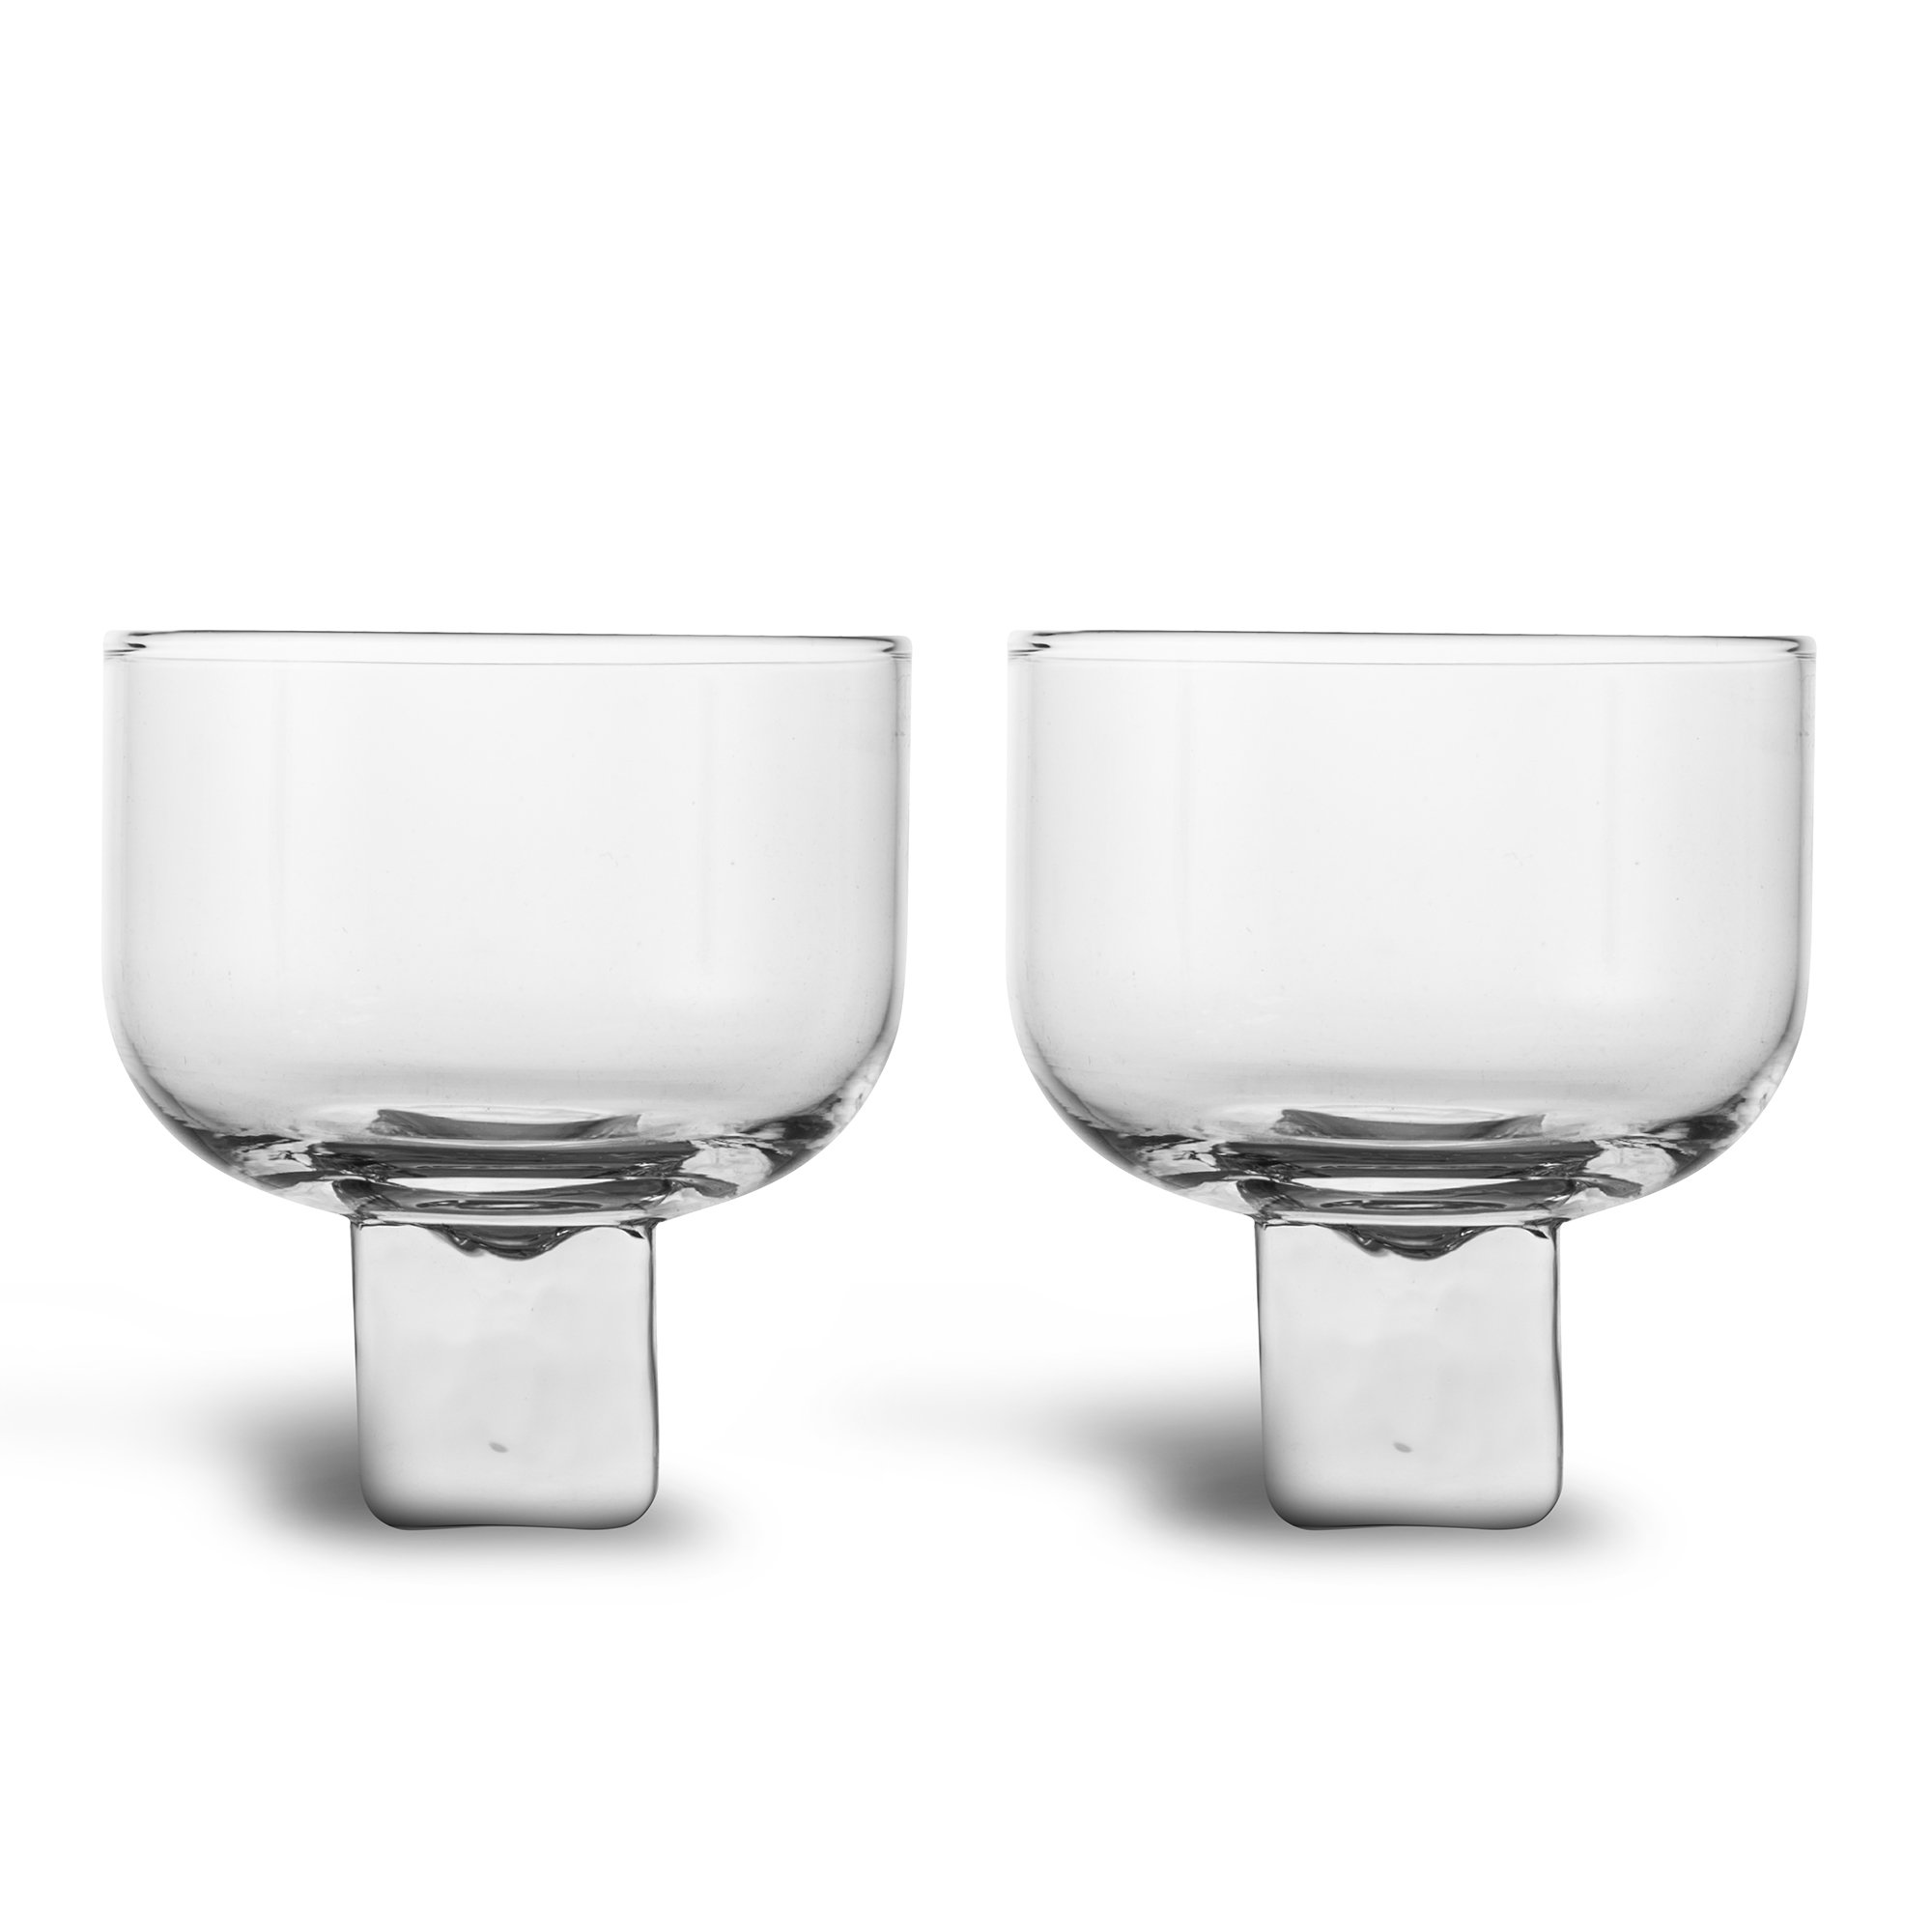 Byon Victoria glas 2-pack